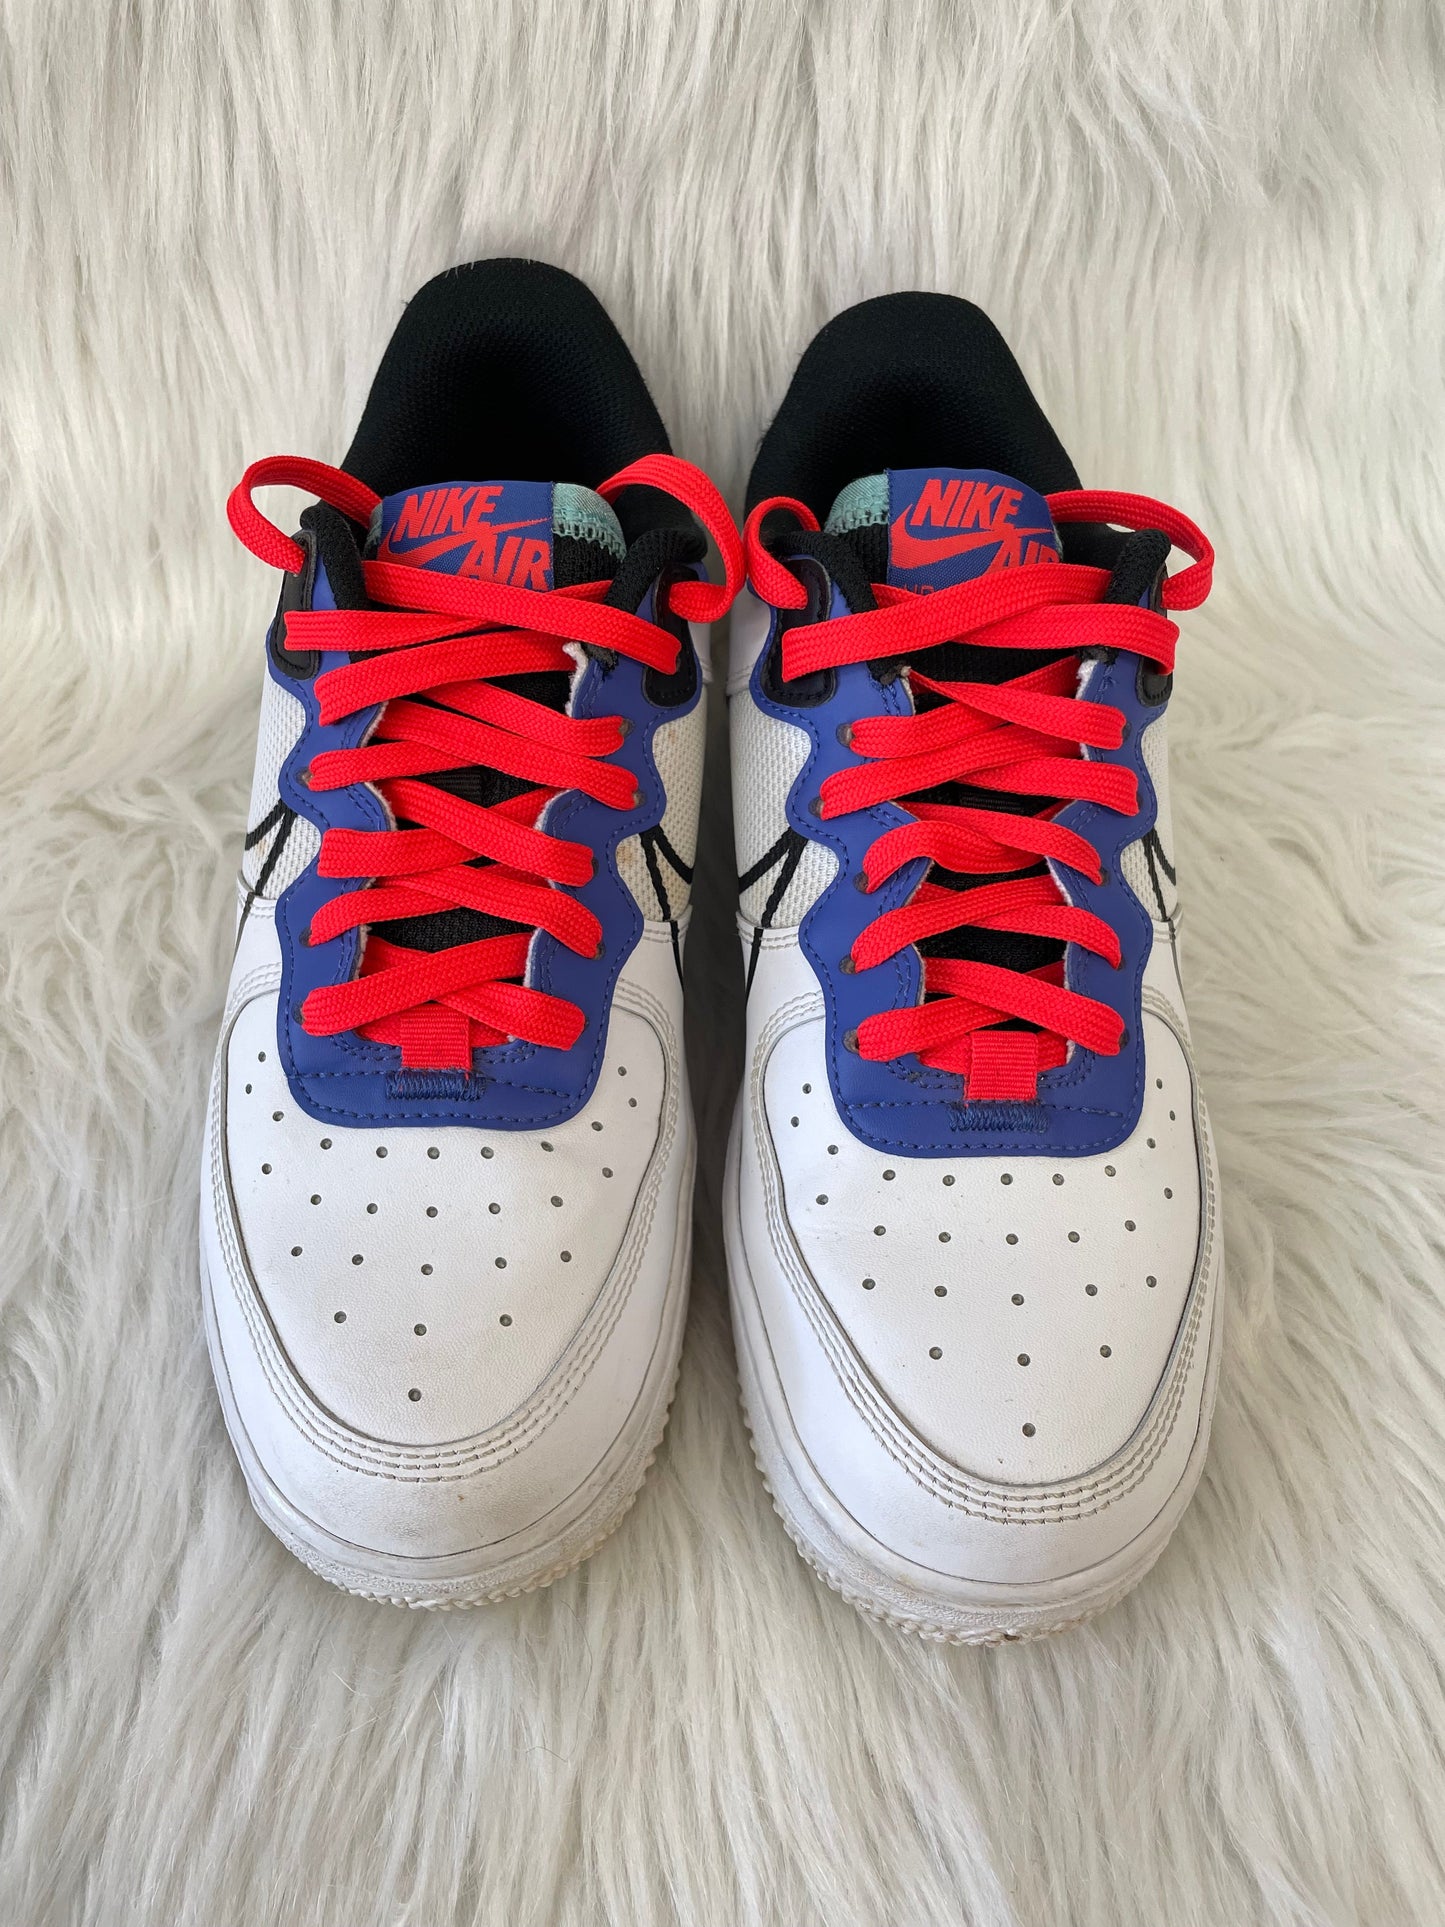 Shoes Sneakers By Nike  Size: 8.5